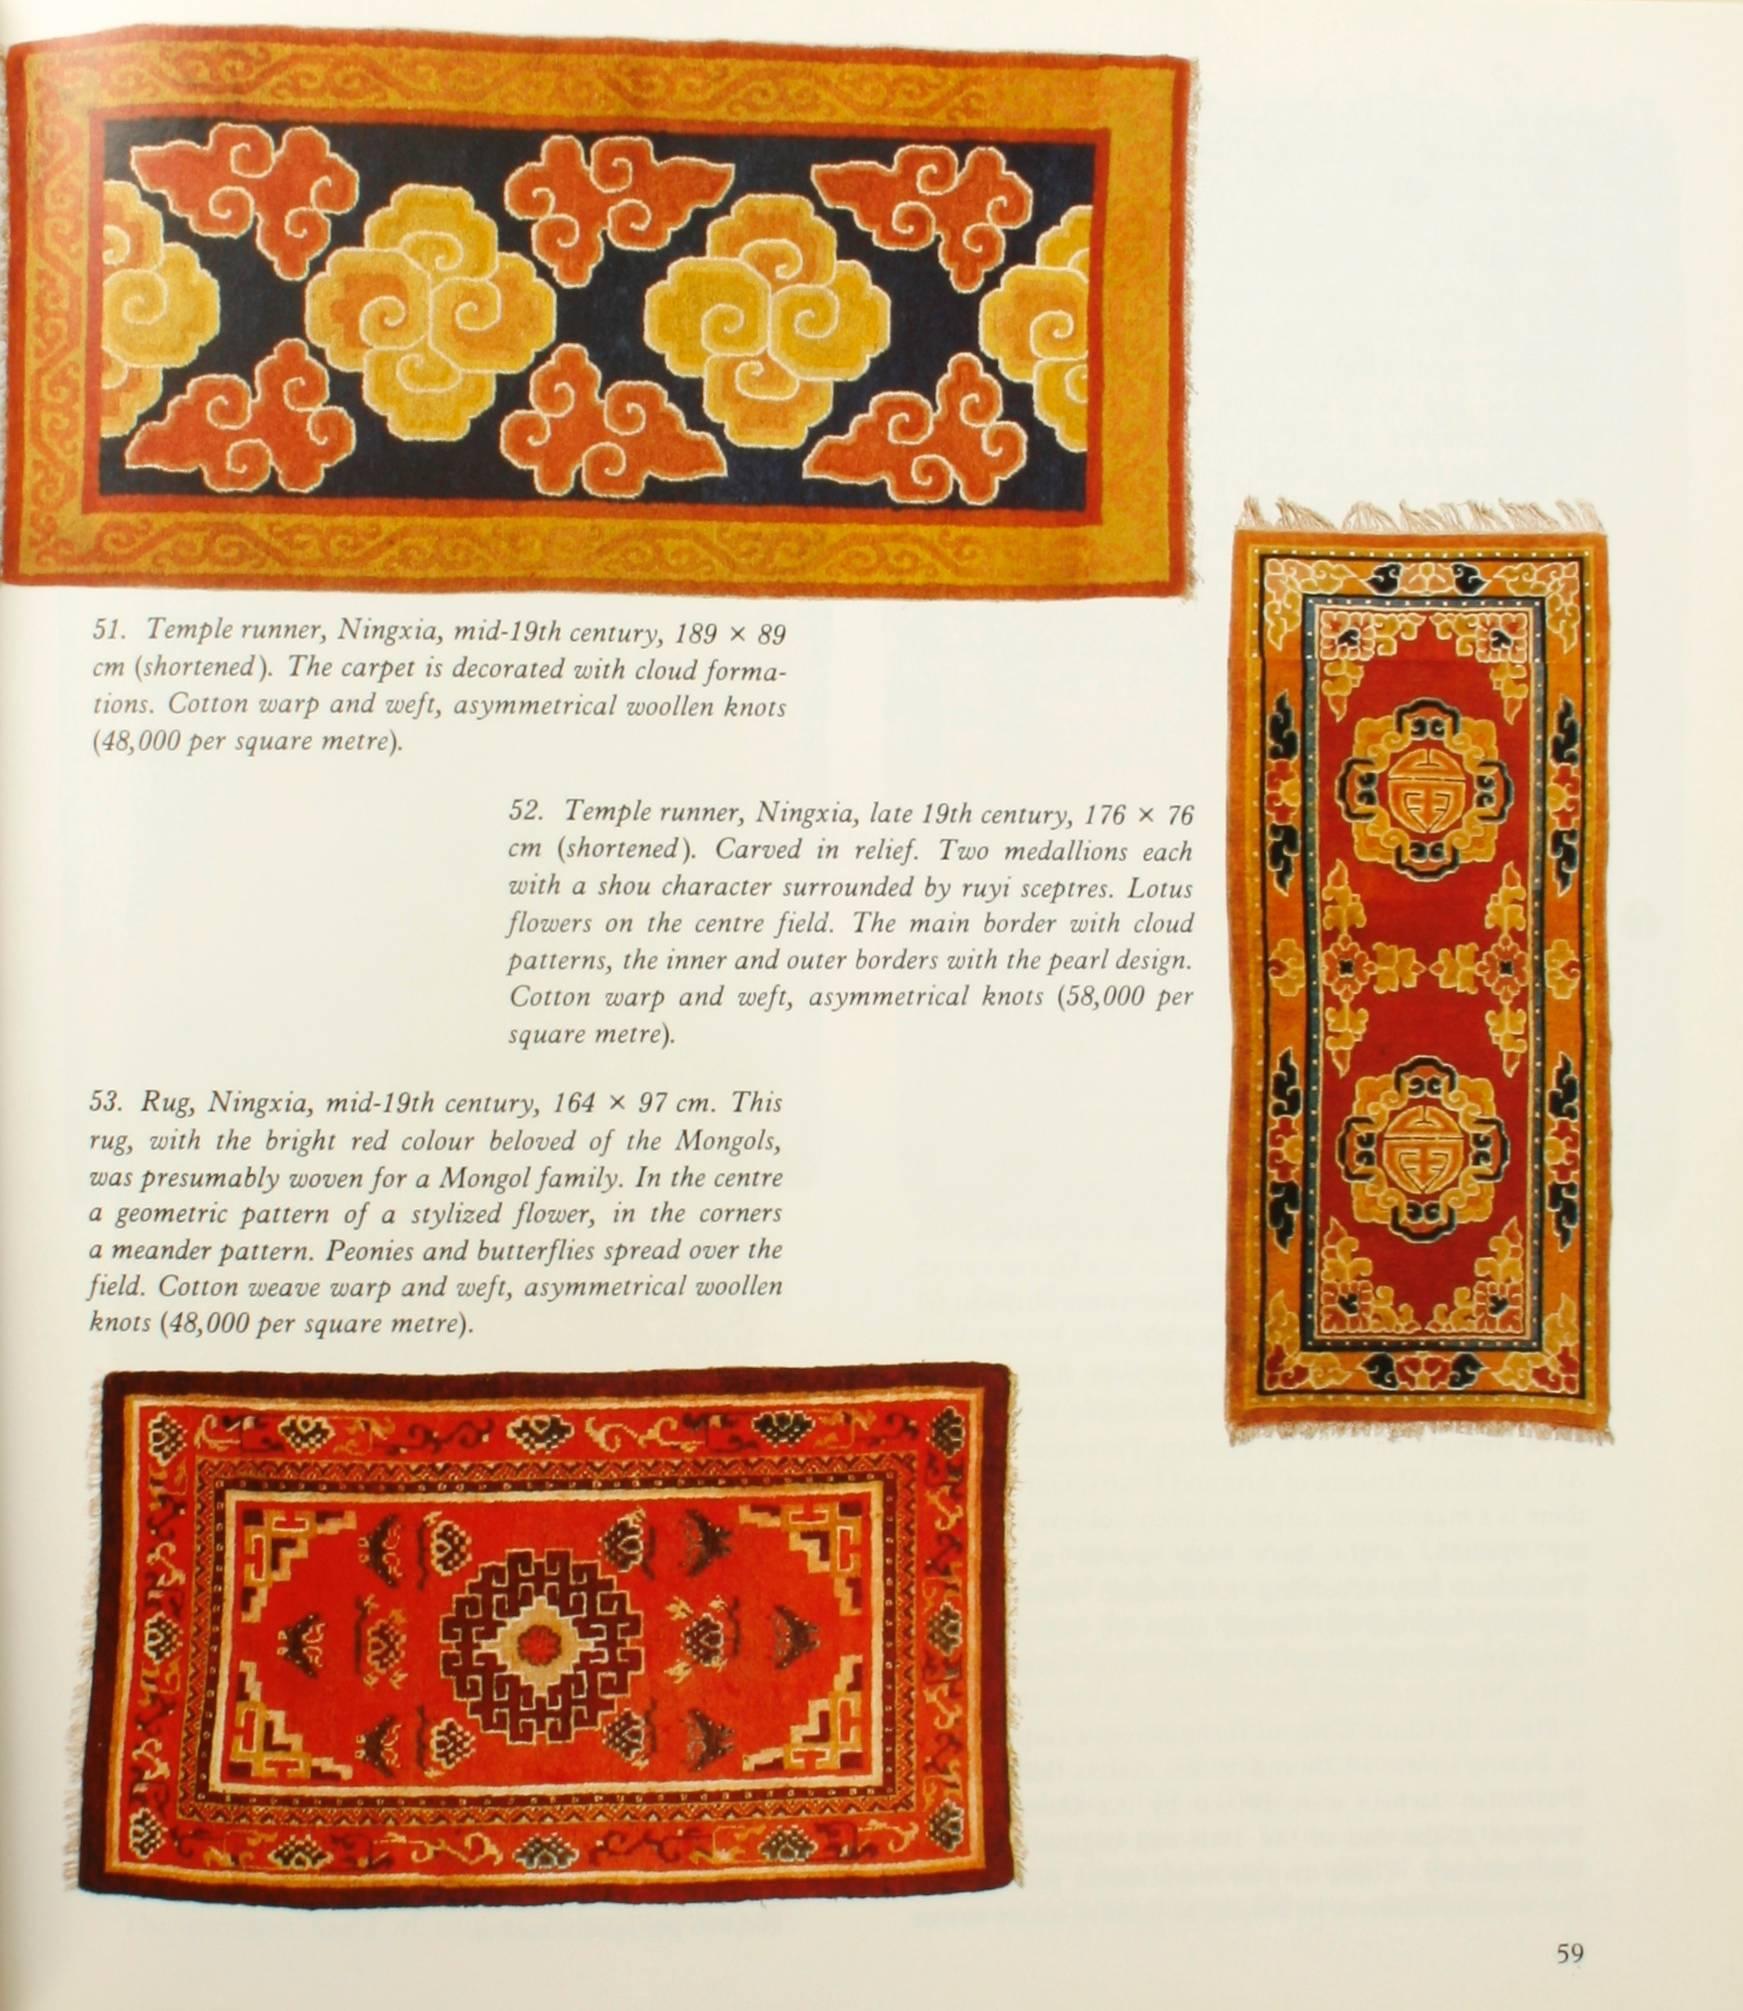 Carpets from China, Xinjiang and Tibet. Boston: Shambhala Publications, Inc., 1988. Hardcover with dust jacket. This beautiful book was written for collectors, scholars and anyone interested in Chinese and Tibetan rugs. It discusses the spread of